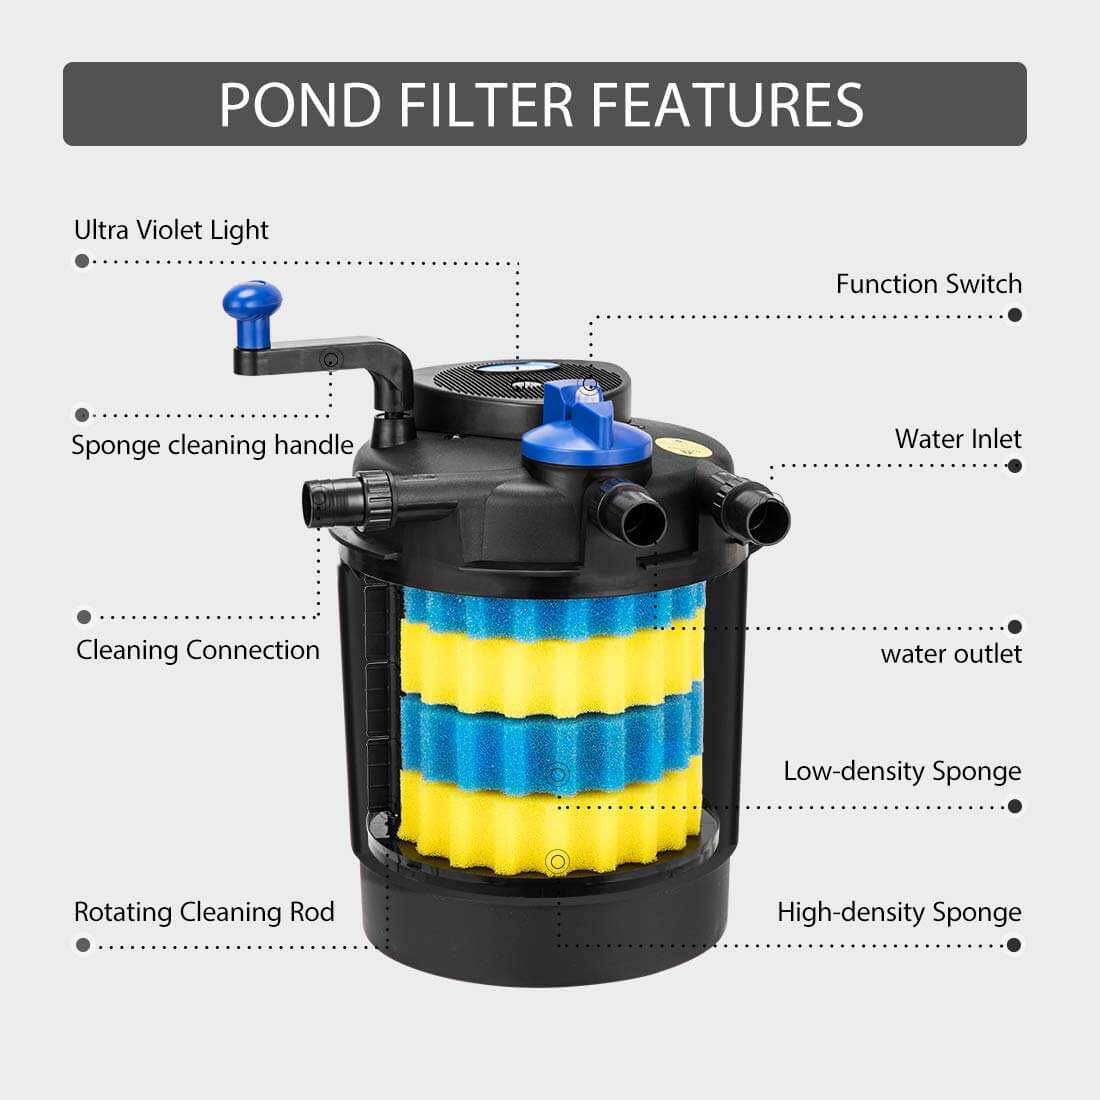 VIVOHOME Pressurized Biological Pond Filter with 13-watt UV Light, Up to 1600 Gallons